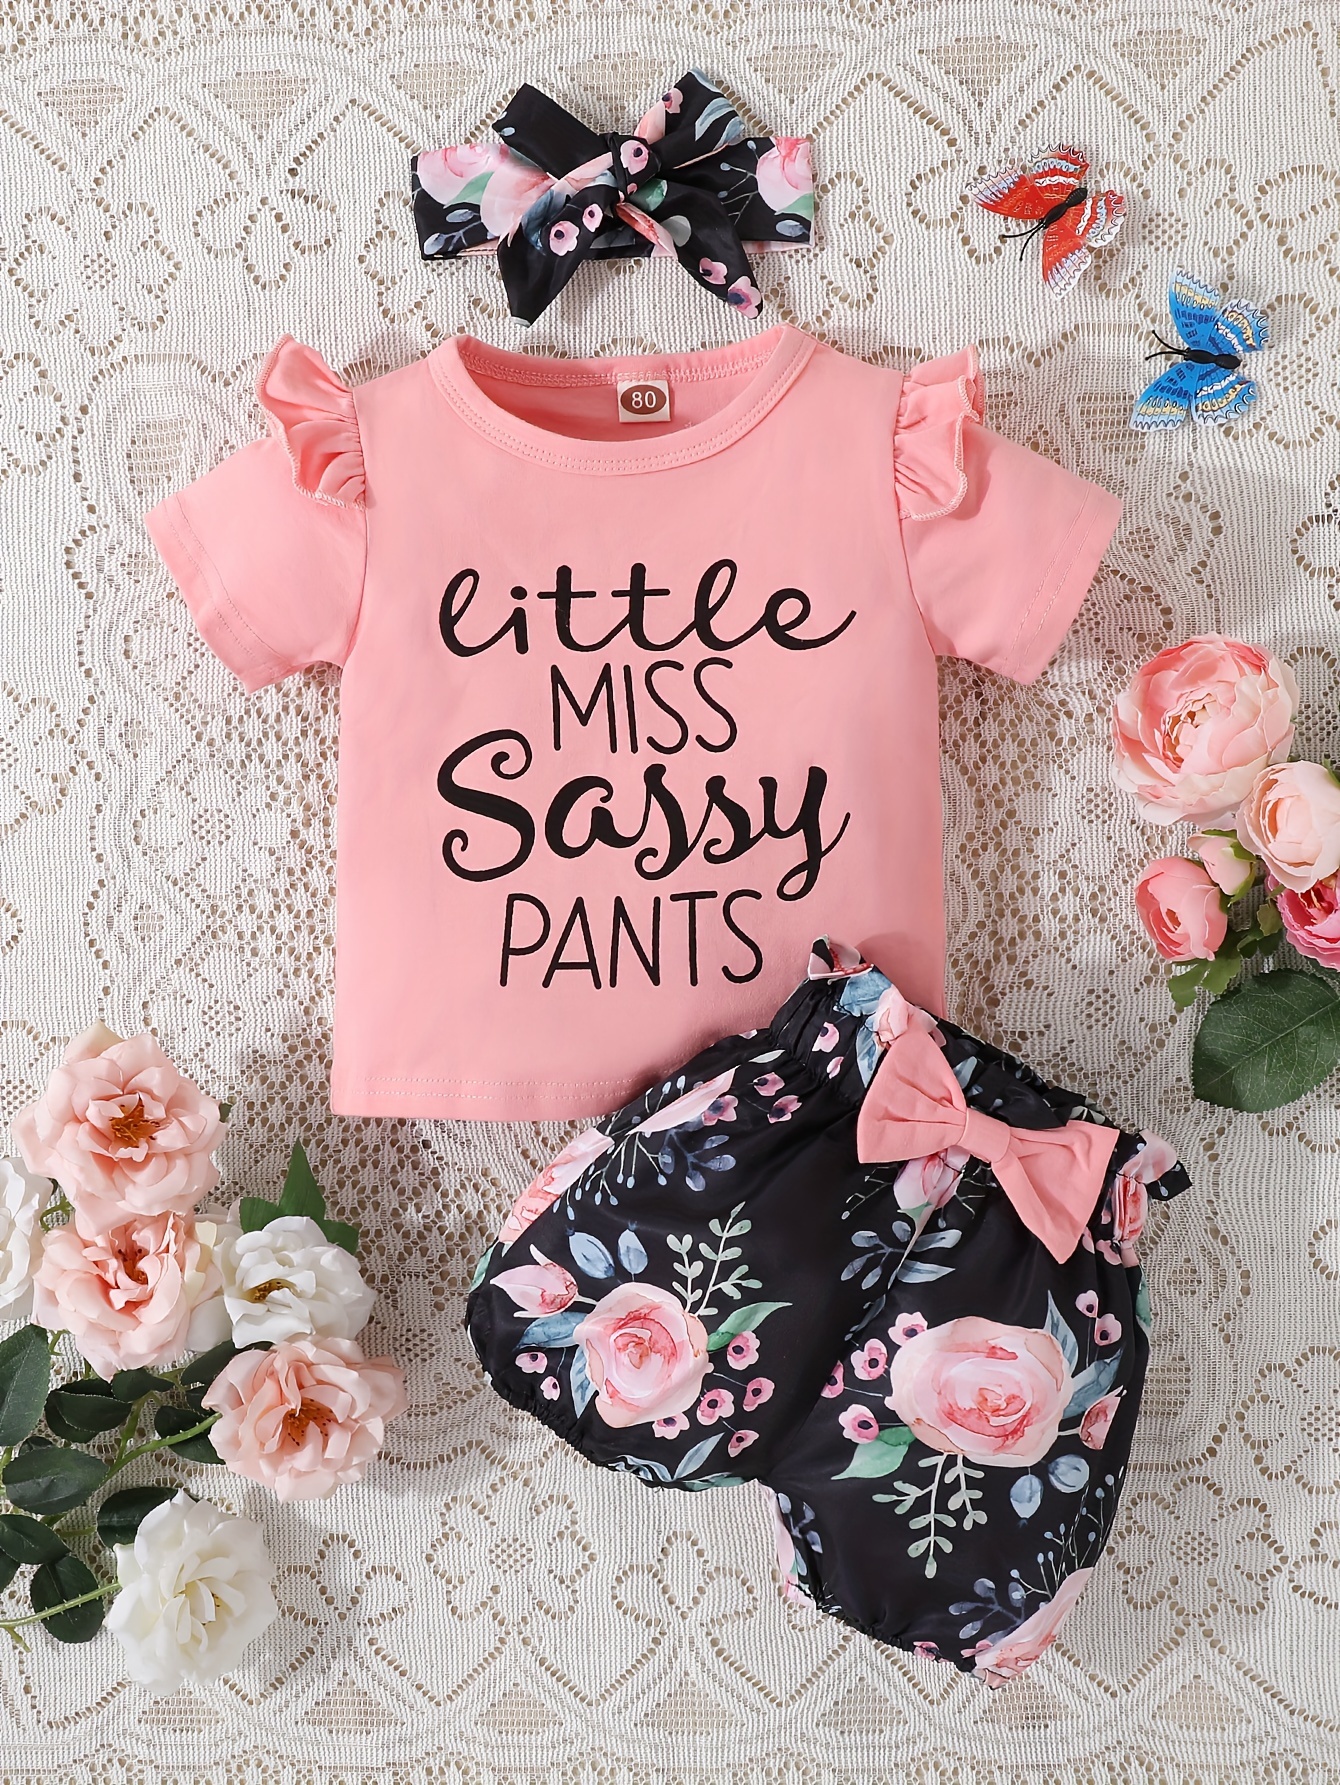 Girl's Cartoon Sunflower Pattern 2pcs, Long Sleeve Top & Flared Pants Set,  LITTLE MISS SASSY PANTS Print Ruffle Decor Casual Outfits, Kids Clothes For